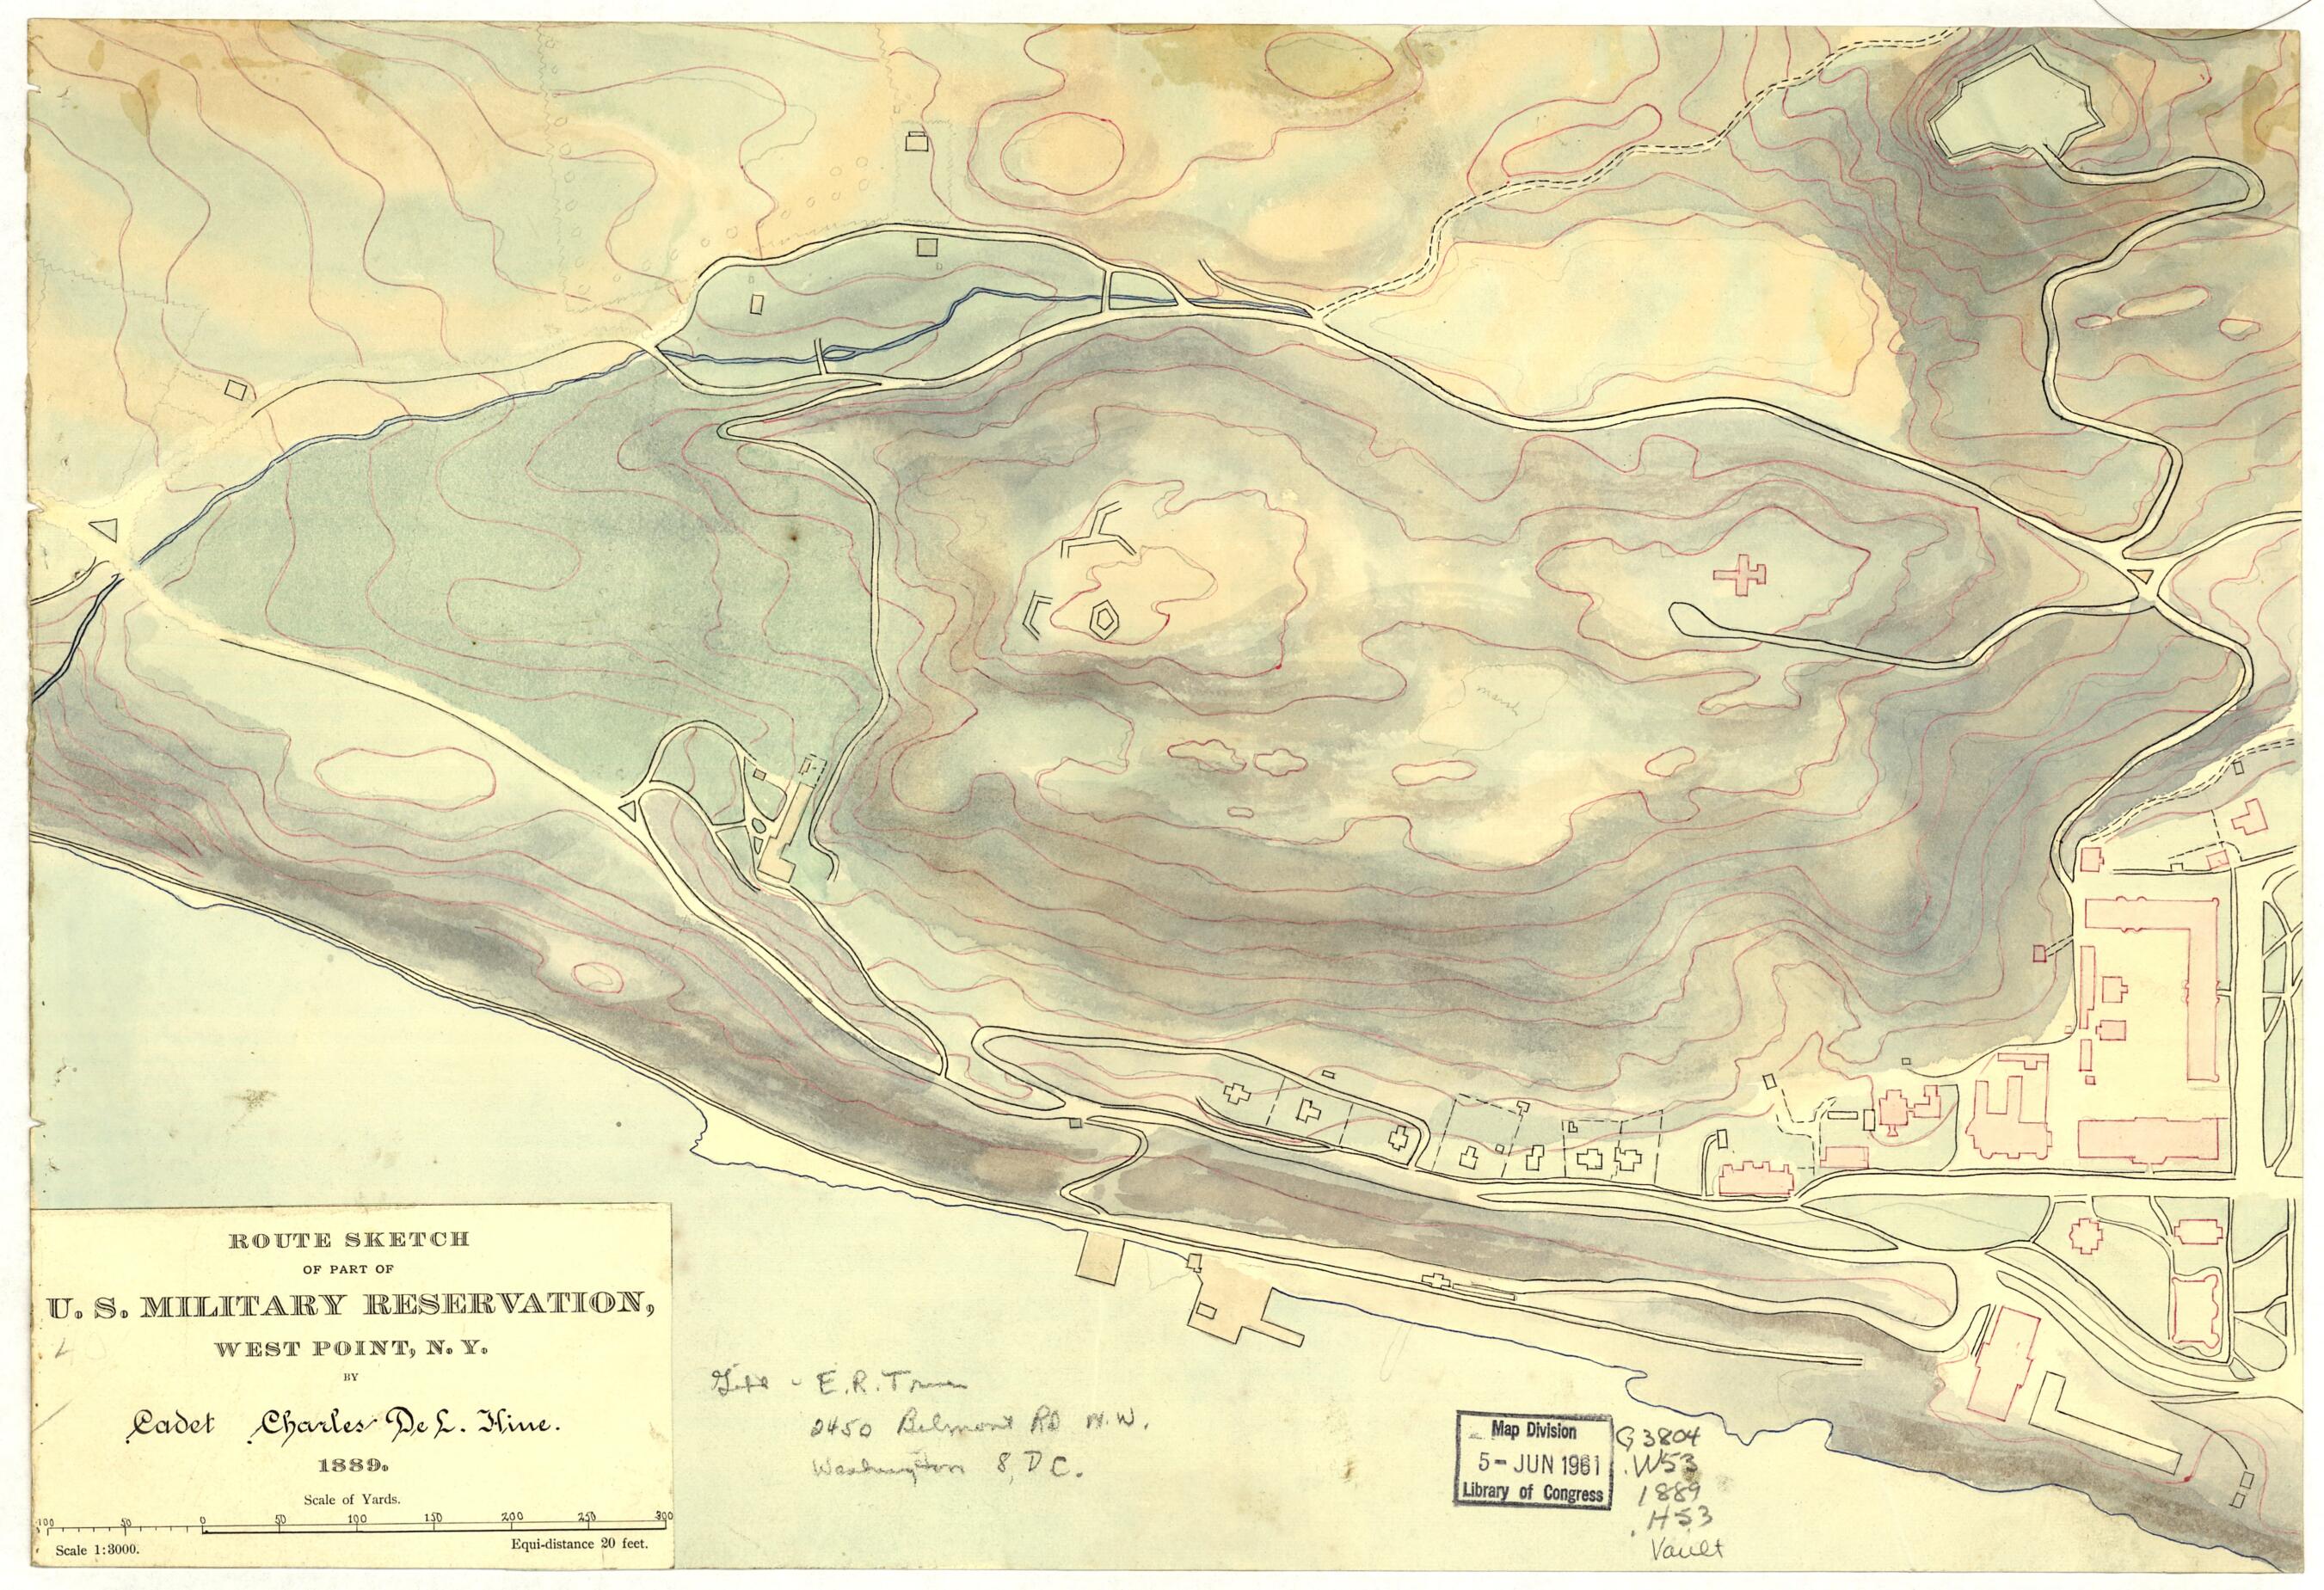 This old map of Route Sketch of Part of U.S. Military Reservation, West Point, New York from 1889 was created by Charles De Lano Hine in 1889